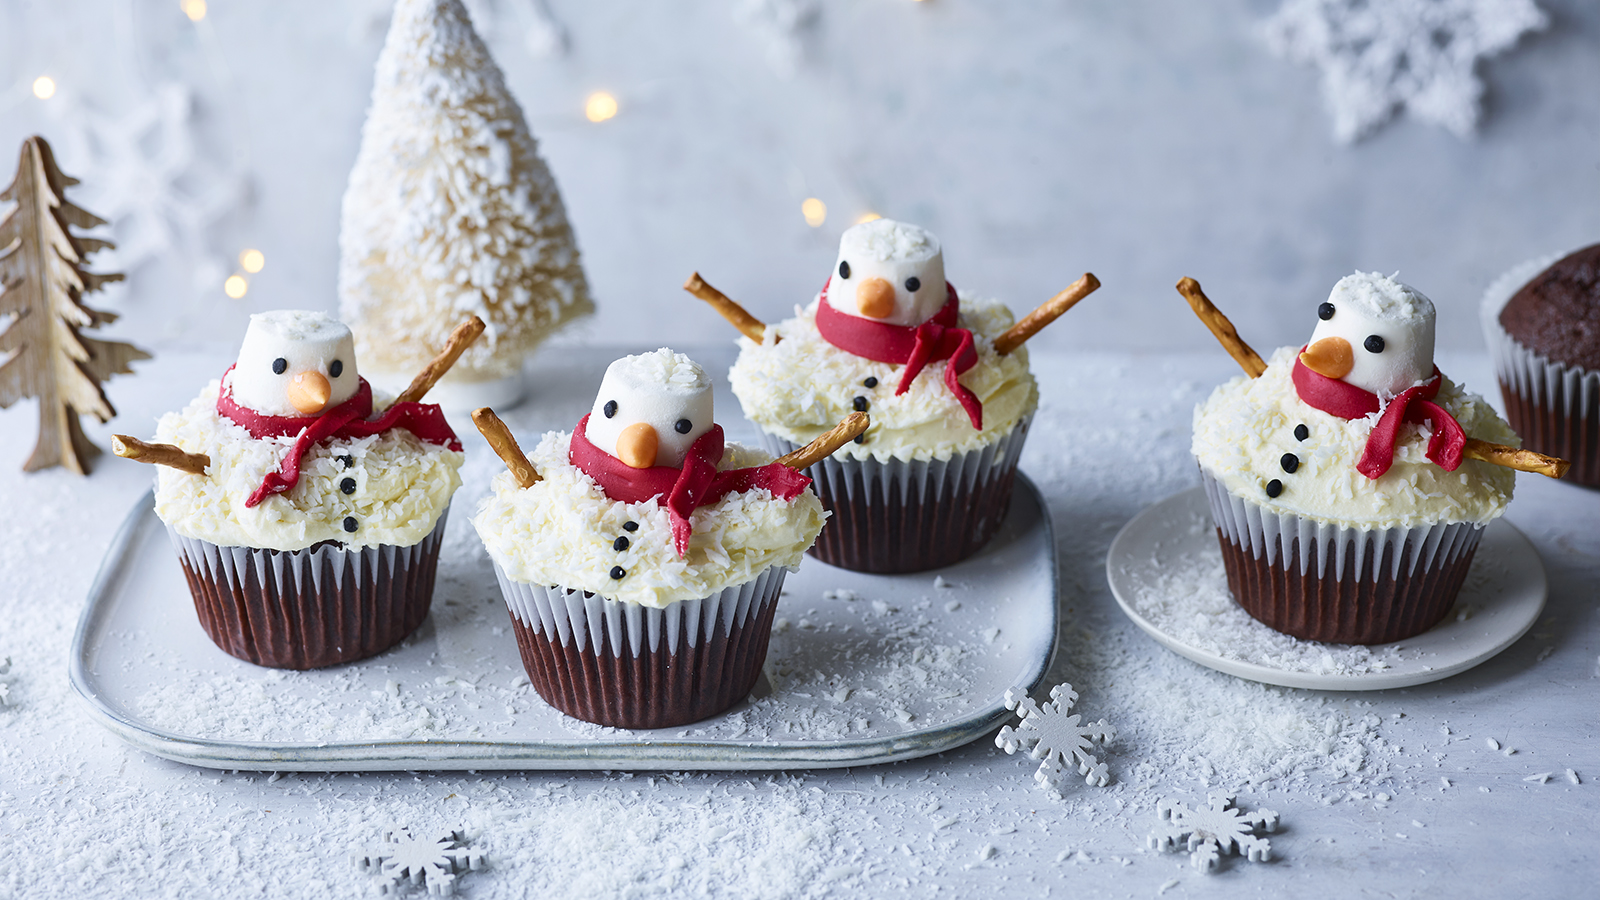 https://food-images.files.bbci.co.uk/food/recipes/melting_snowman_cupcakes_77135_16x9.jpg